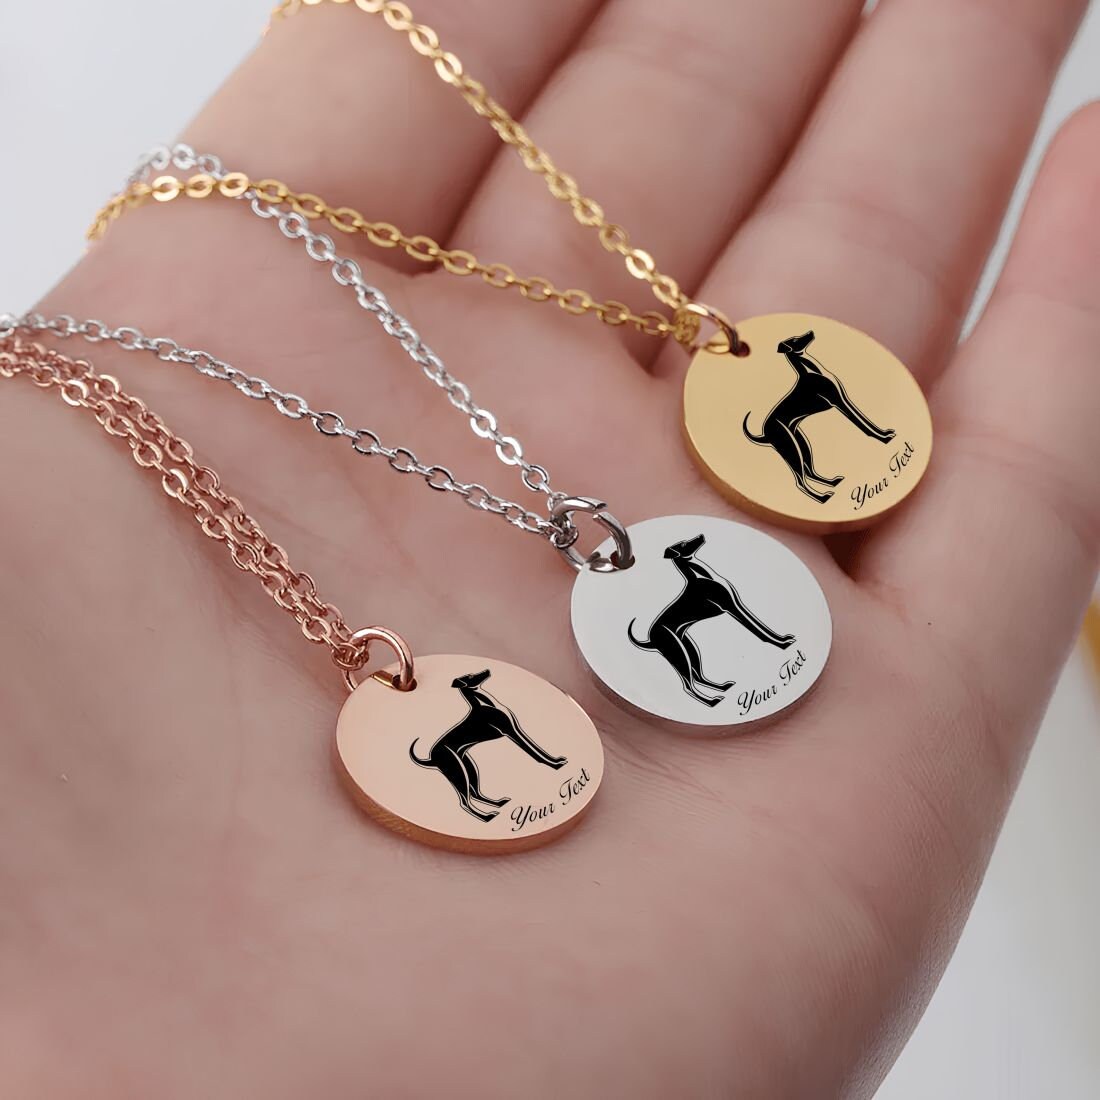 Whippet Dog Portrait Necklace - Personalizable Jewelry